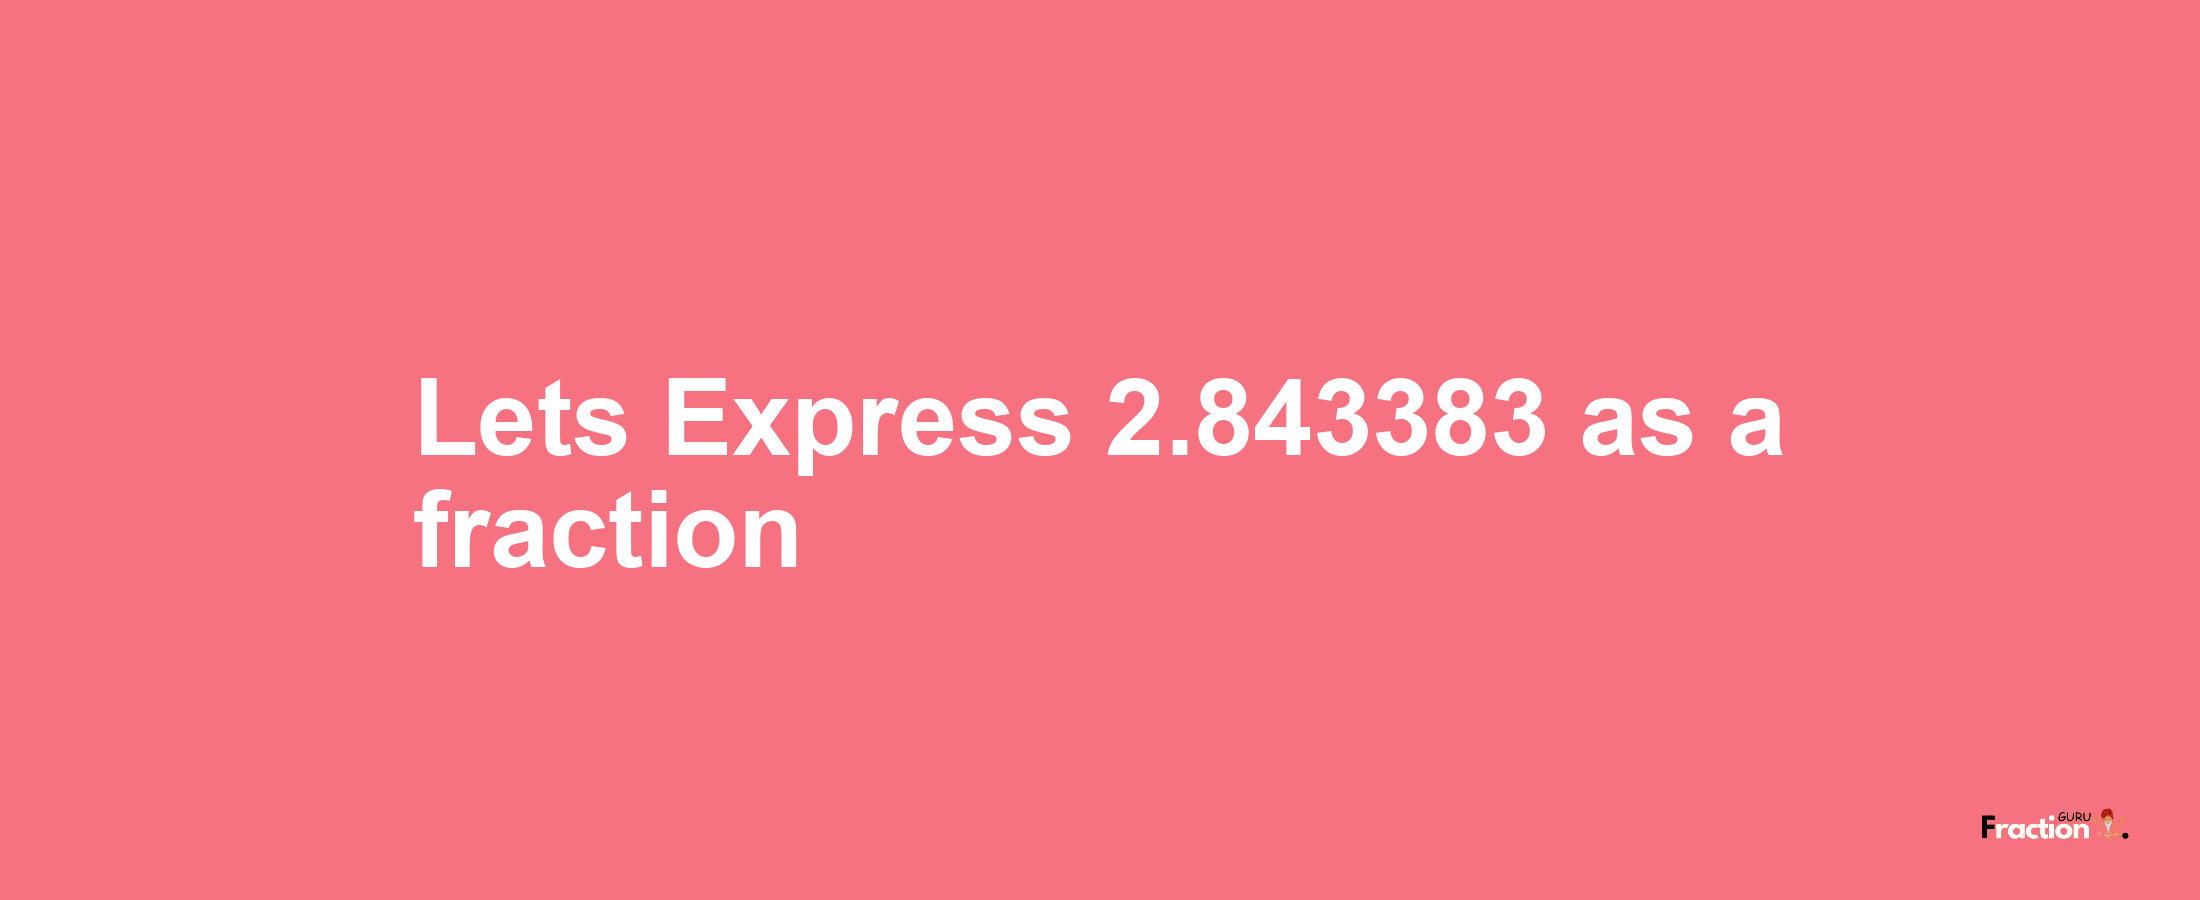 Lets Express 2.843383 as afraction